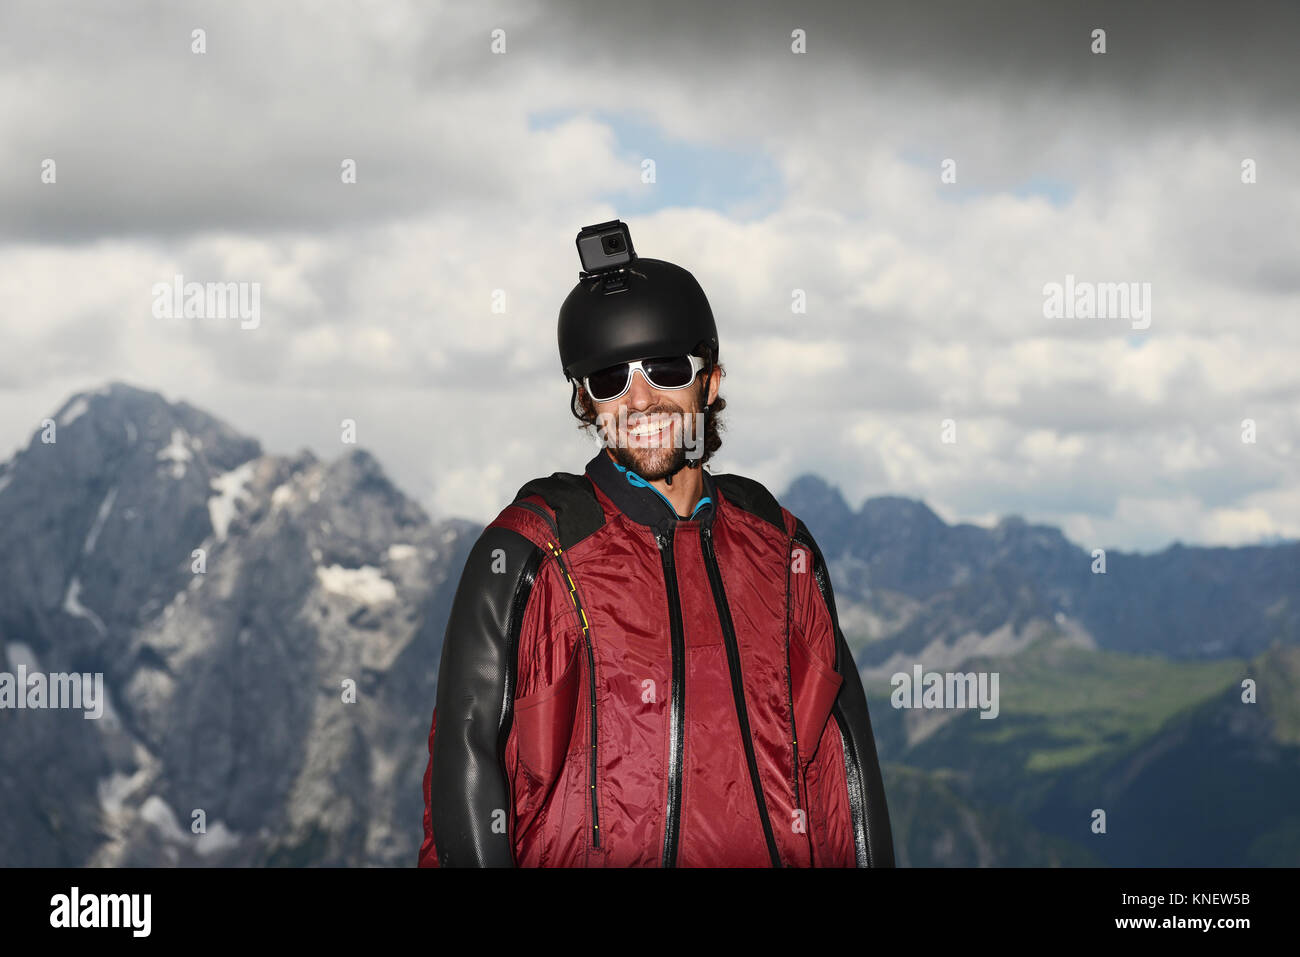 Base jumper wearing wingsuit with action camera on helmet, Dolomite mountains, Canazei, Trentino Alto Adige, Italy, Europe Stock Photo